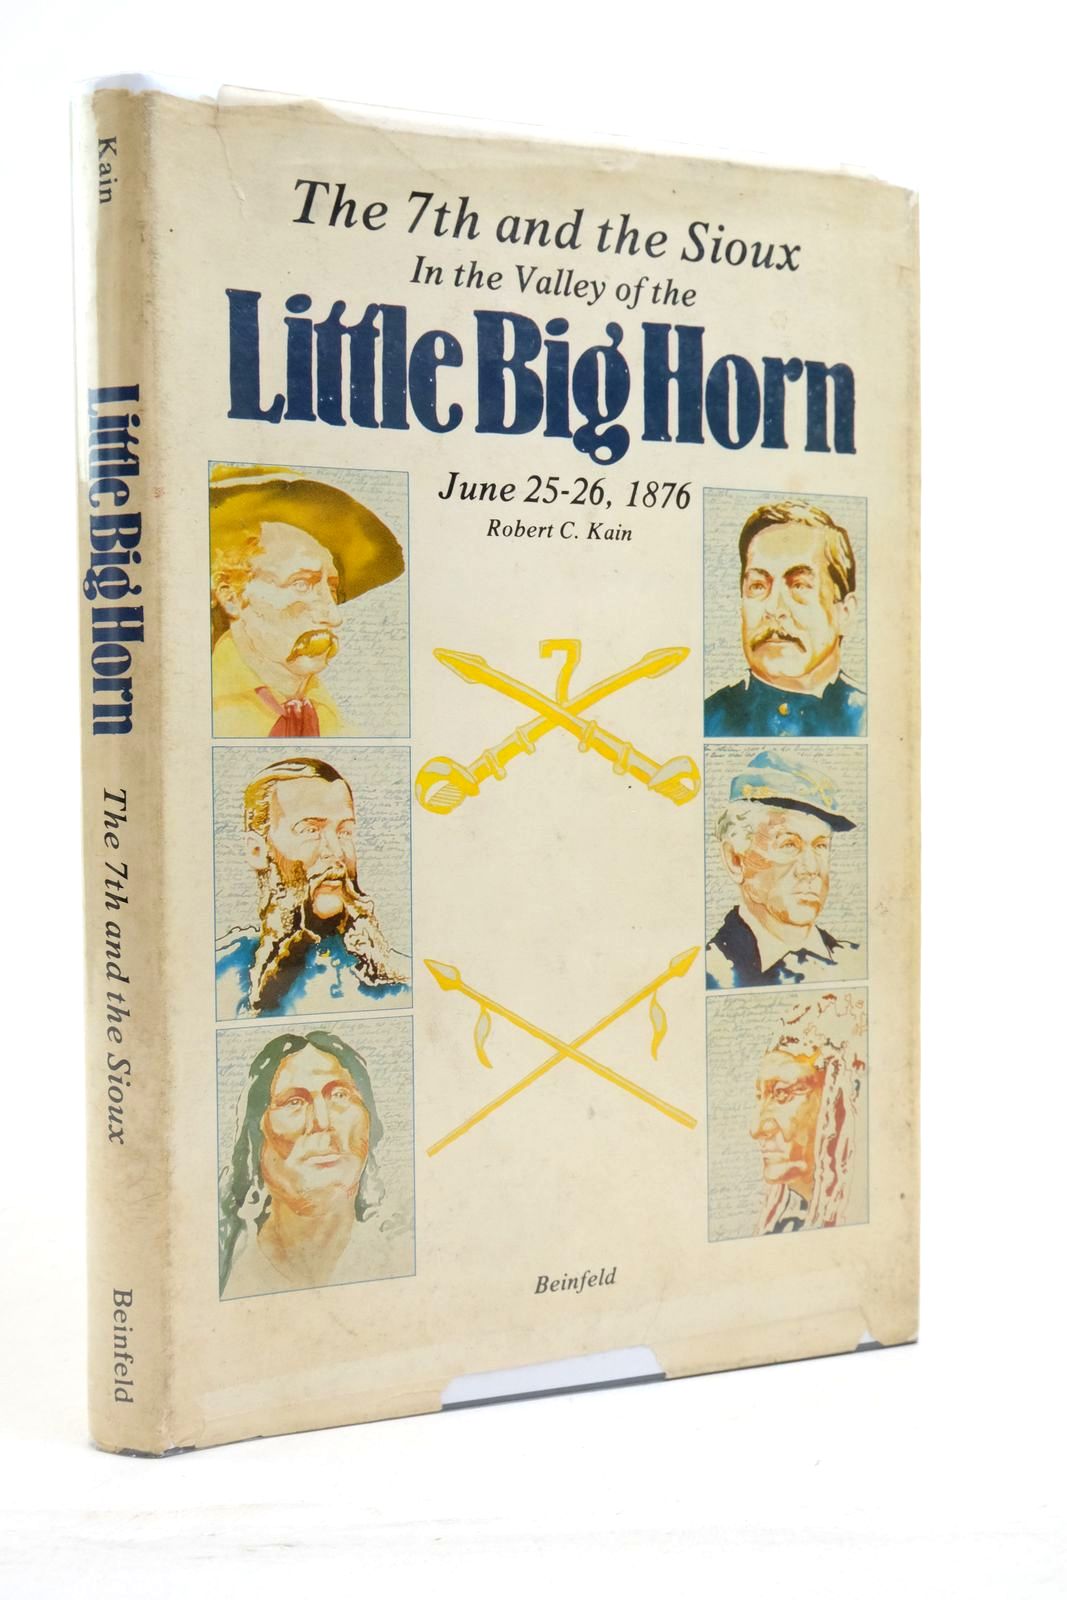 Photo of IN THE VALLEY OF THE LITTLE BIG HORN: THE 7TH AND THE SIOUX JUNE 25-26, 1876 written by Kain, Robert C. published by Beinfeld Publishing Inc. (STOCK CODE: 2137854)  for sale by Stella & Rose's Books